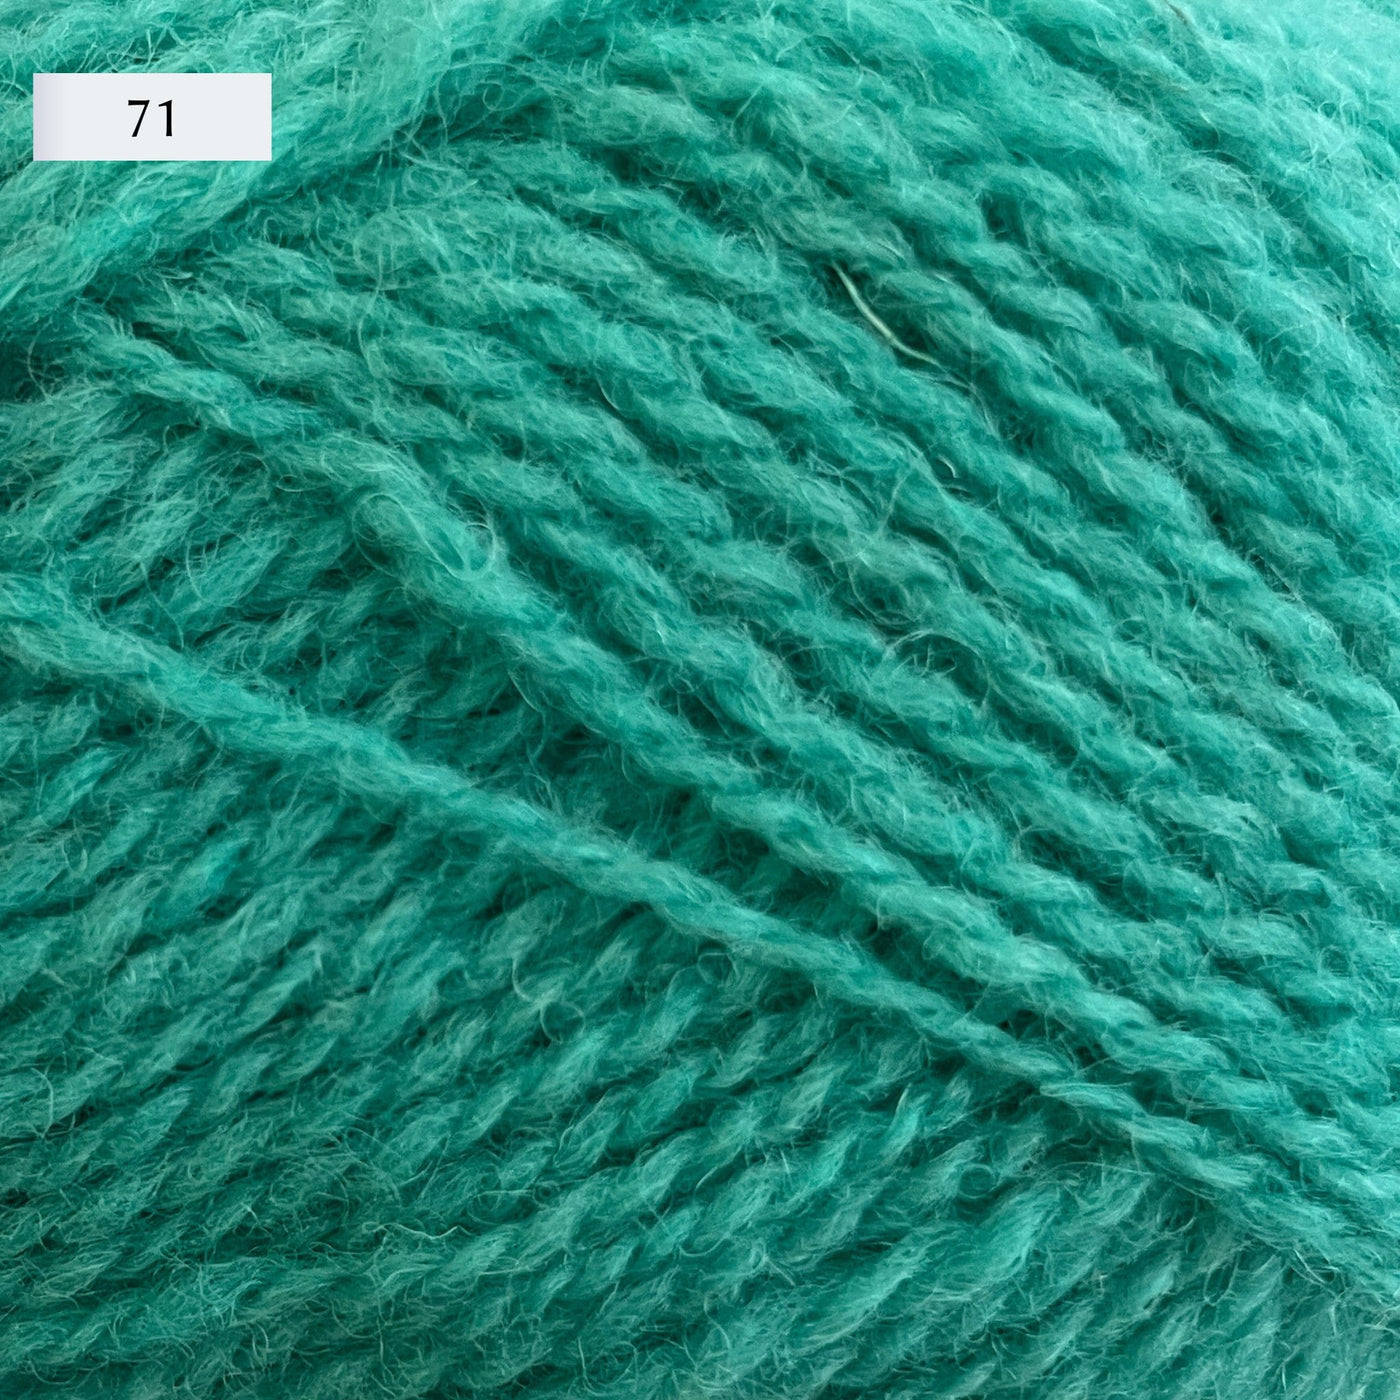 Jamieson & Smith 2ply Jumper Weight, light fingering weight yarn, in color 71, a green-seafoam